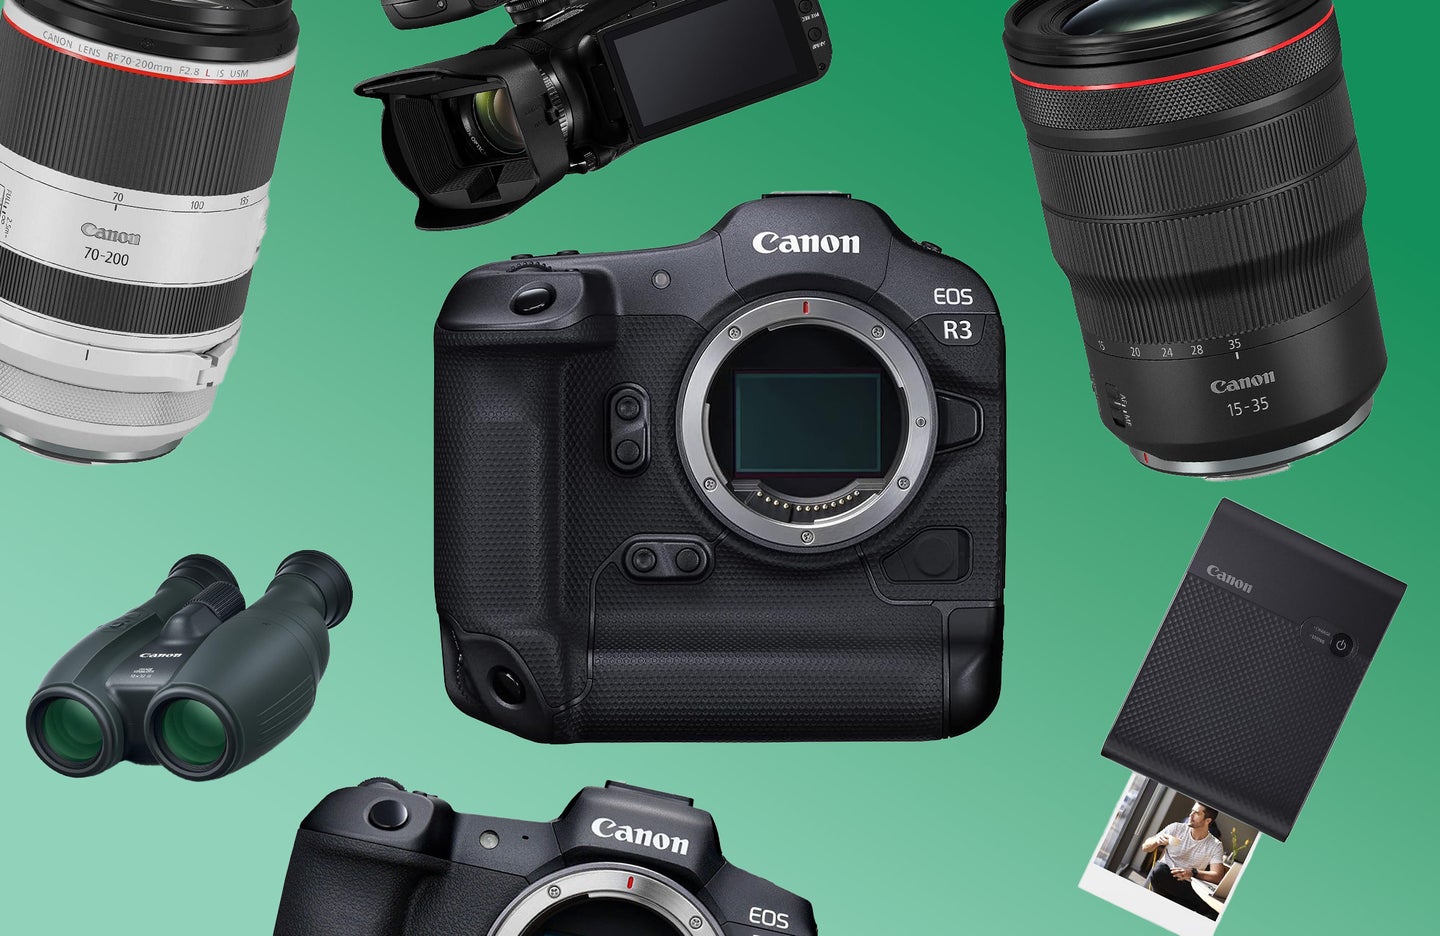 Canon cameras, lenses, binocular, and printer randomly scattered against a background that fades from light green to dark green